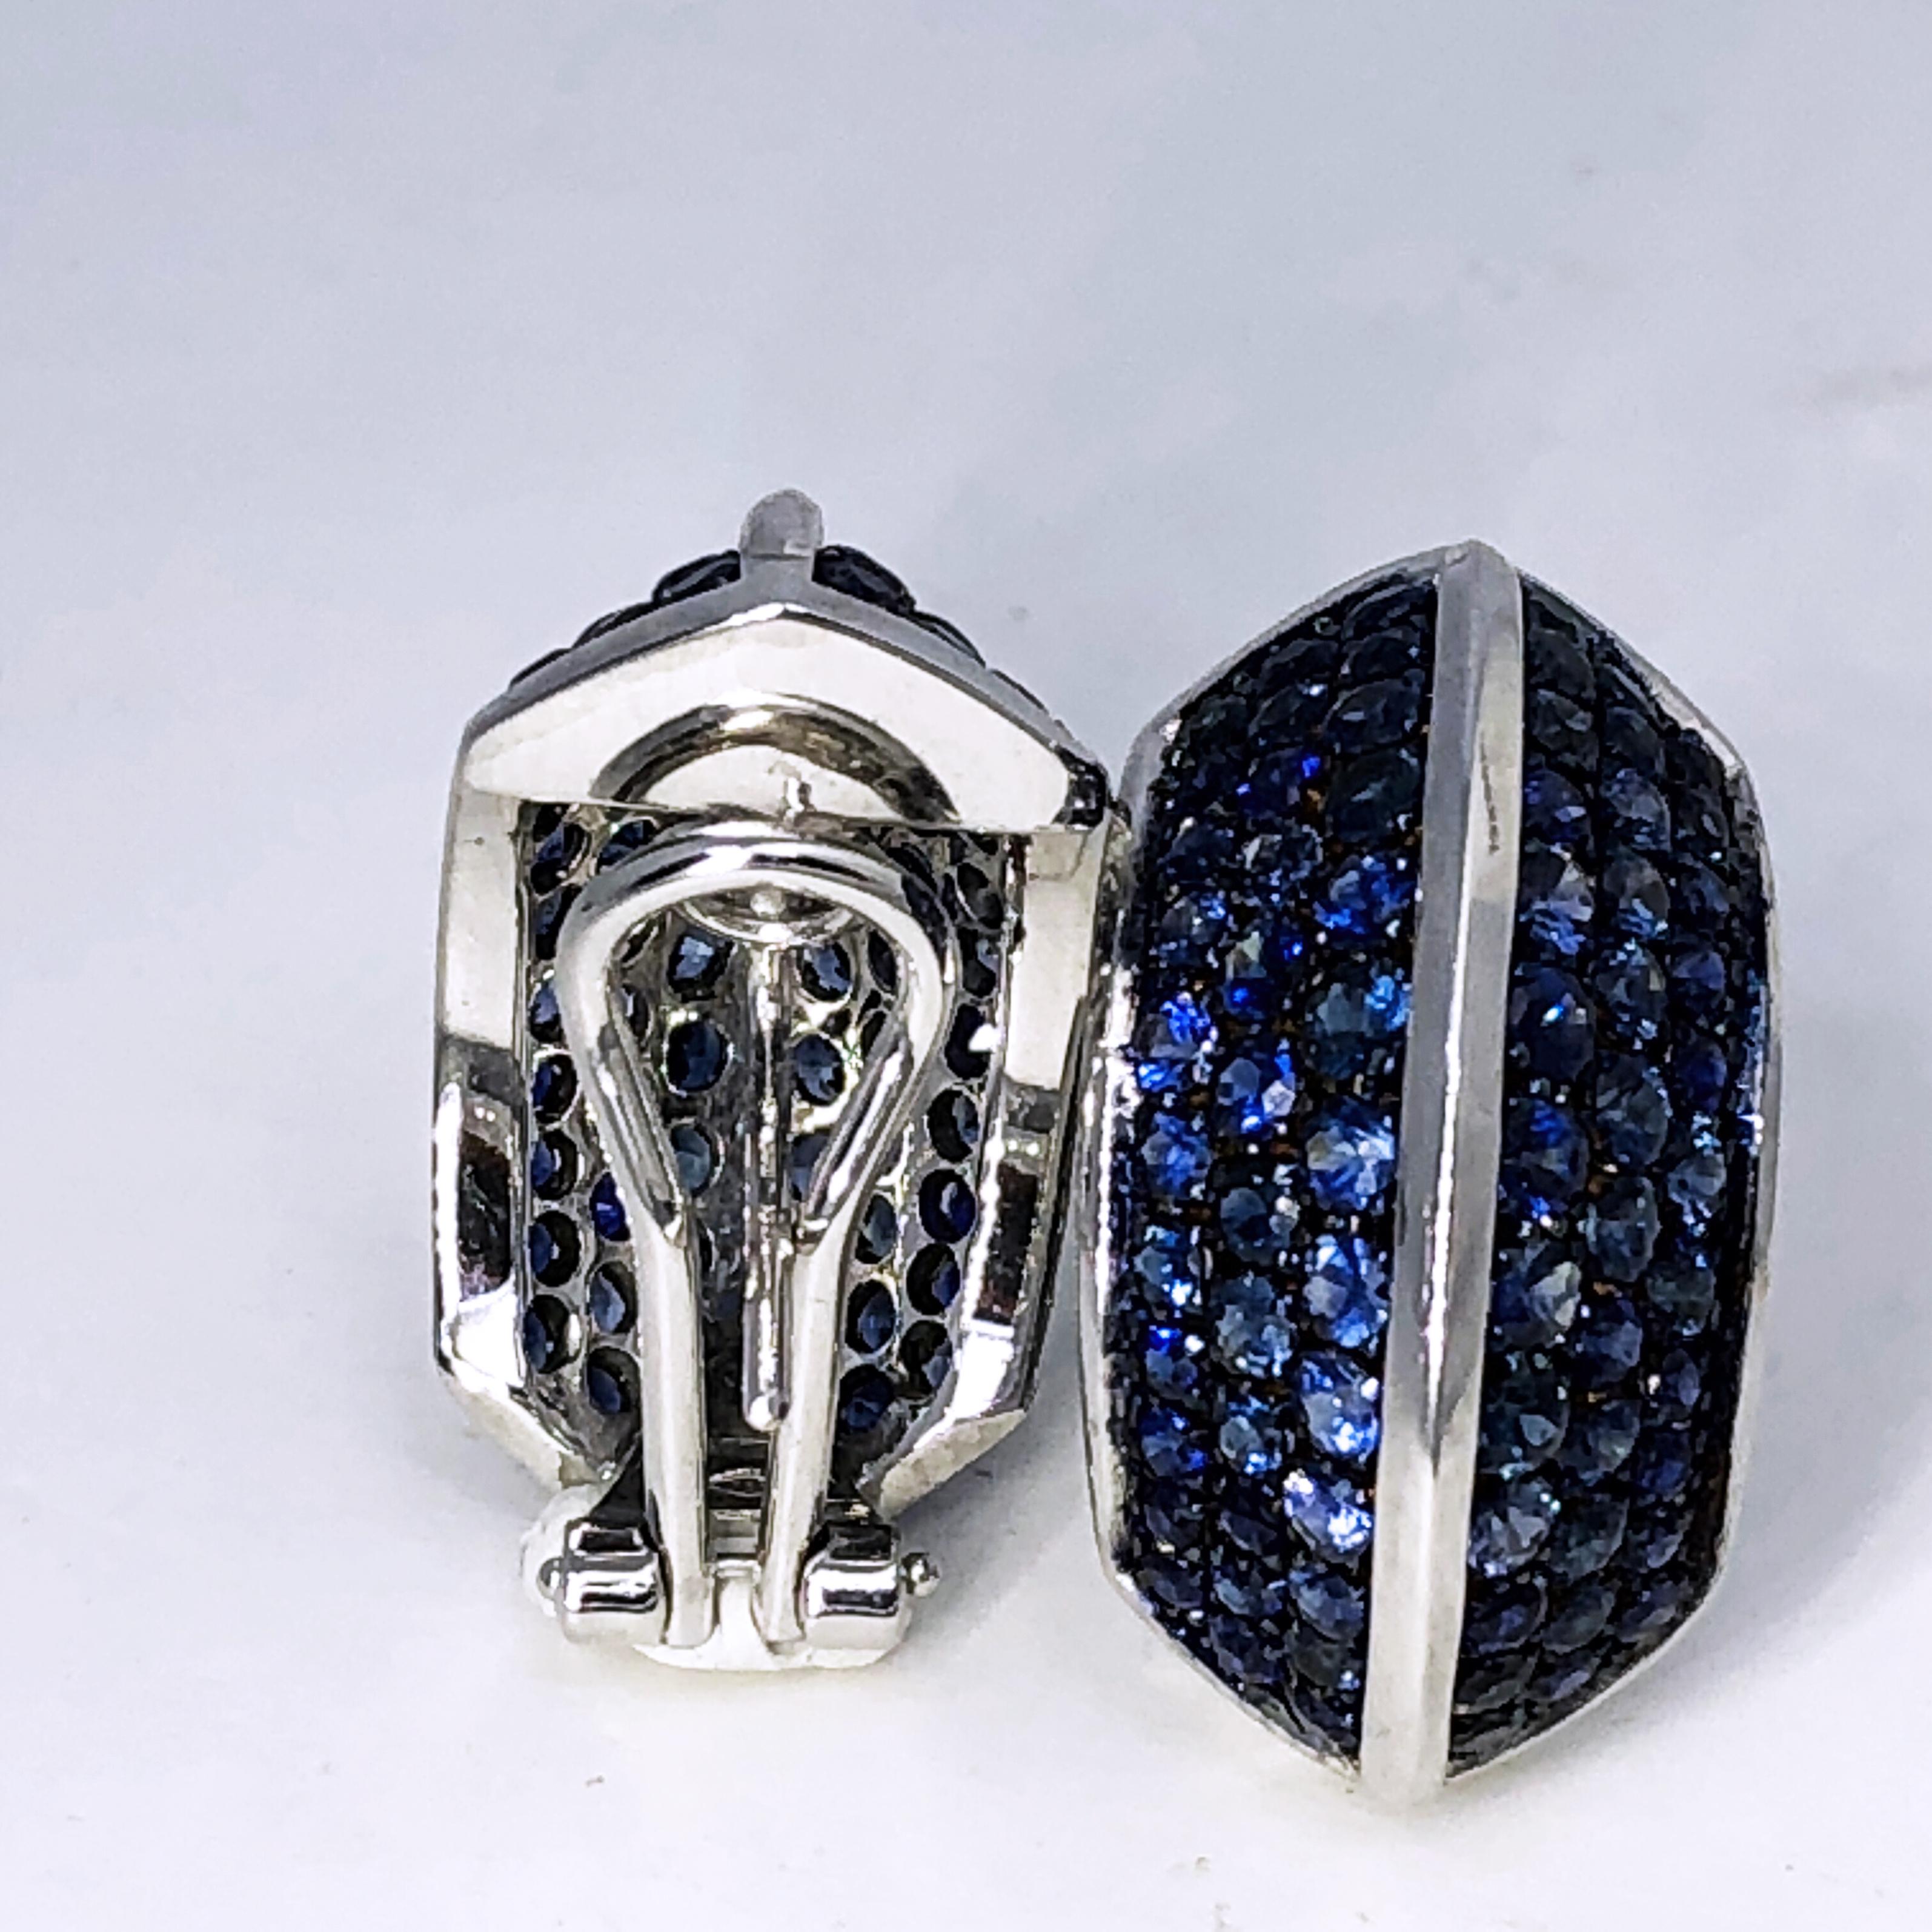 One-of-a-kind Pyramid Shaped Earrings Featuring 5.72 Carat Natural Blue Sapphire in a 13.40g 18K White and Black Gold Setting: the magic of  blue sapphires pavé is enhanced by the mysterious iridescent black gold.
In our fitted dark brown suede